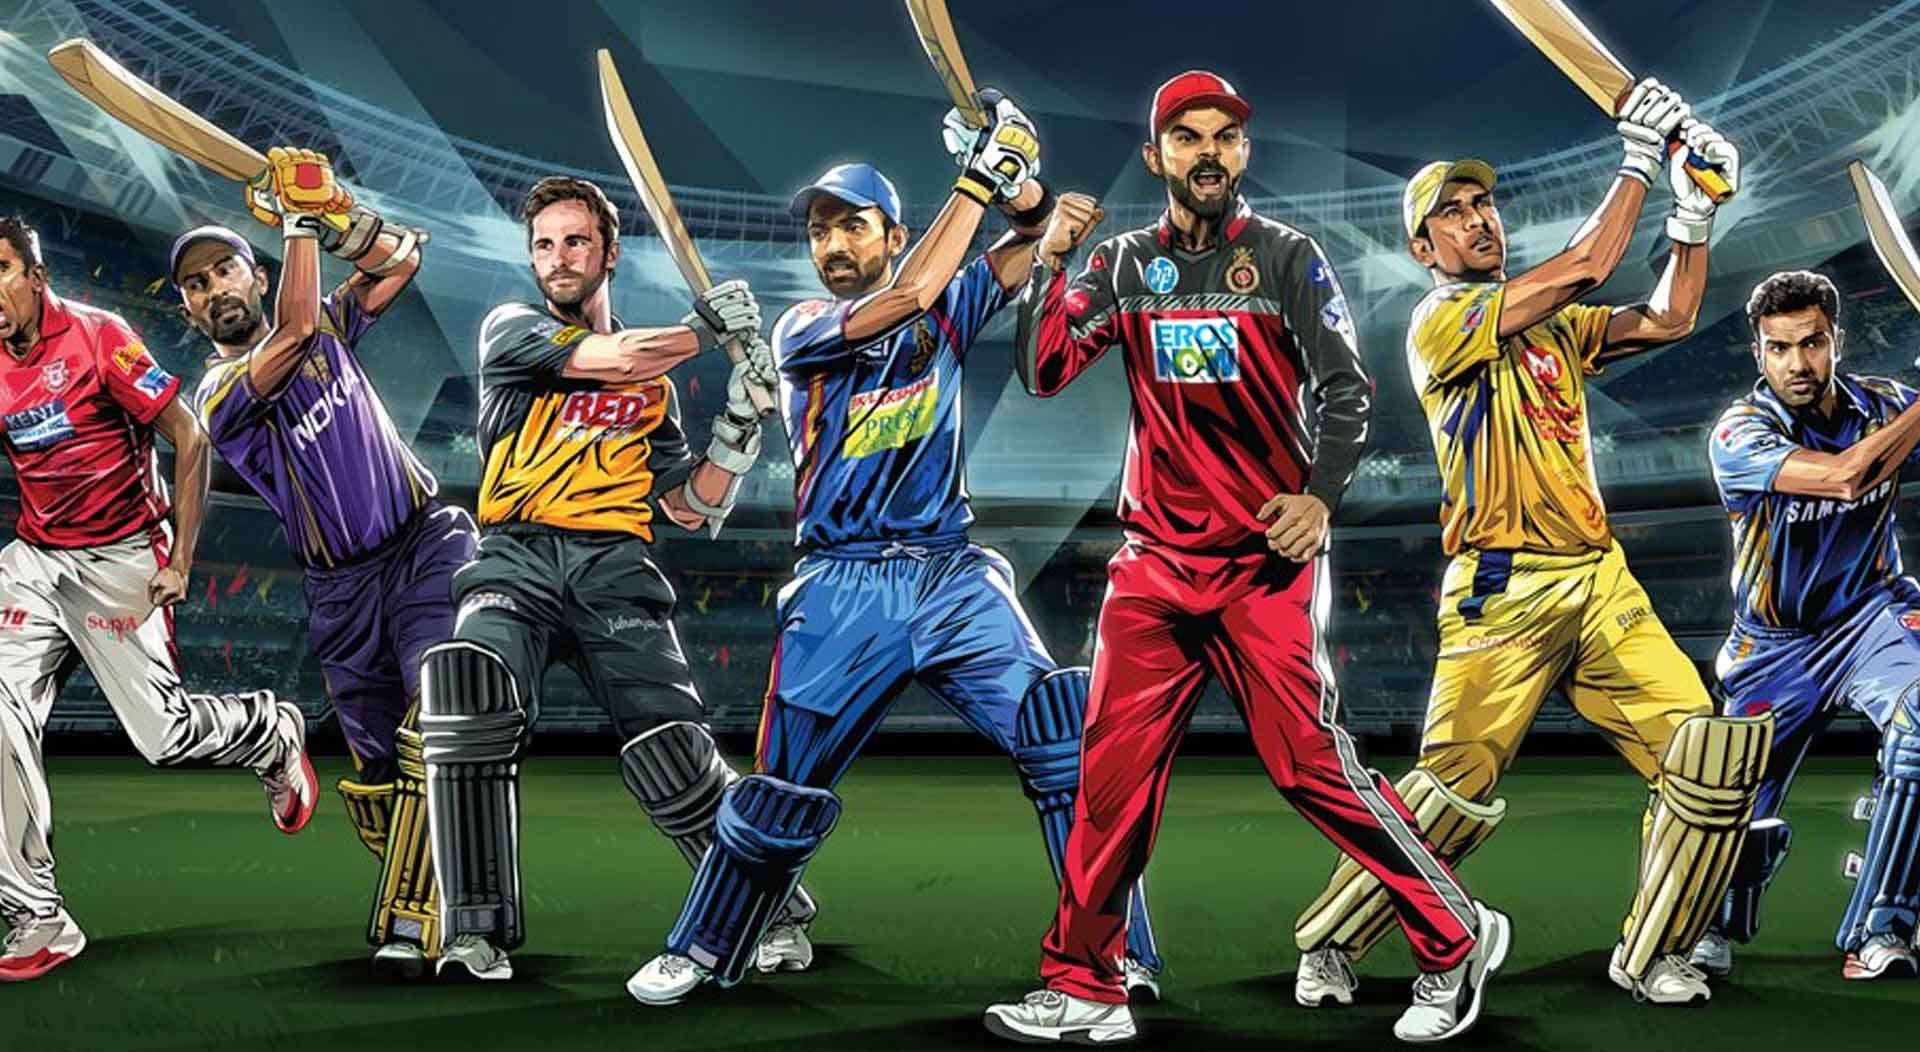 2020 IPL is going to be very different